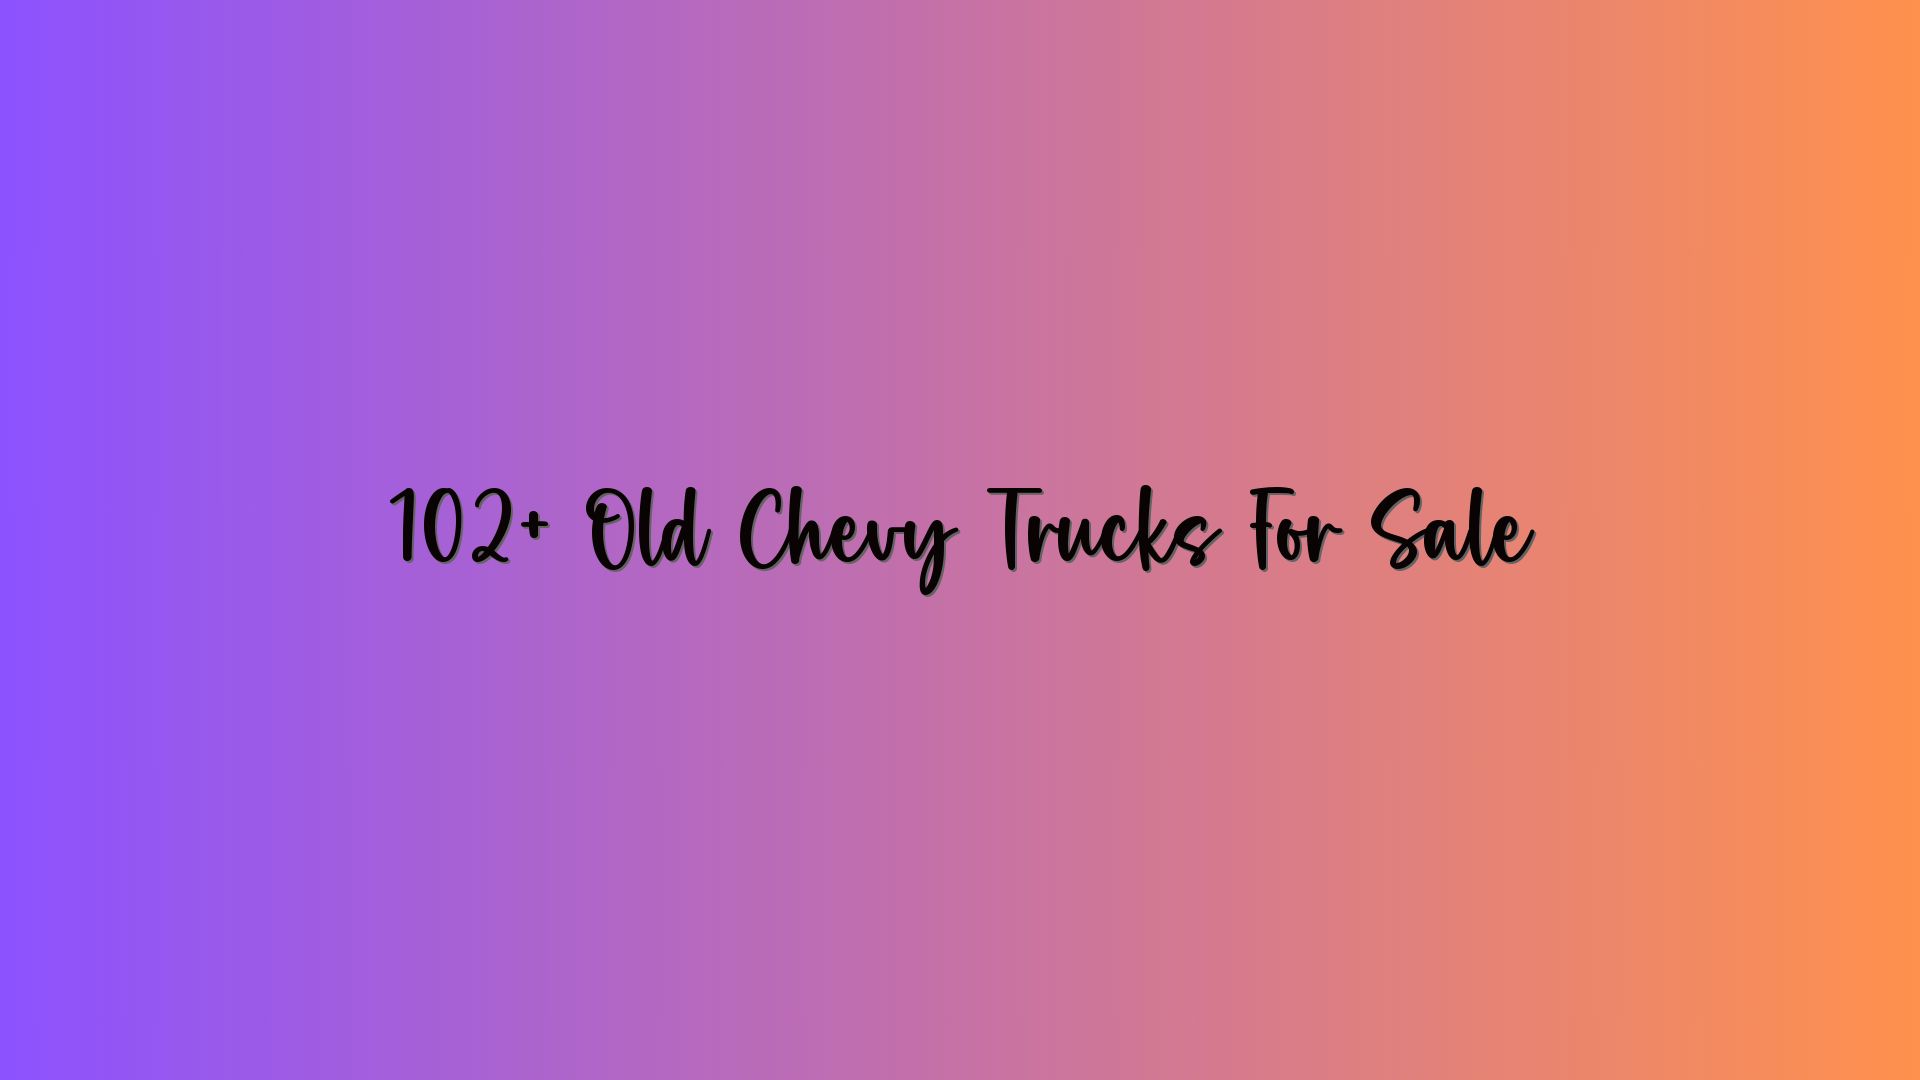 102+ Old Chevy Trucks For Sale